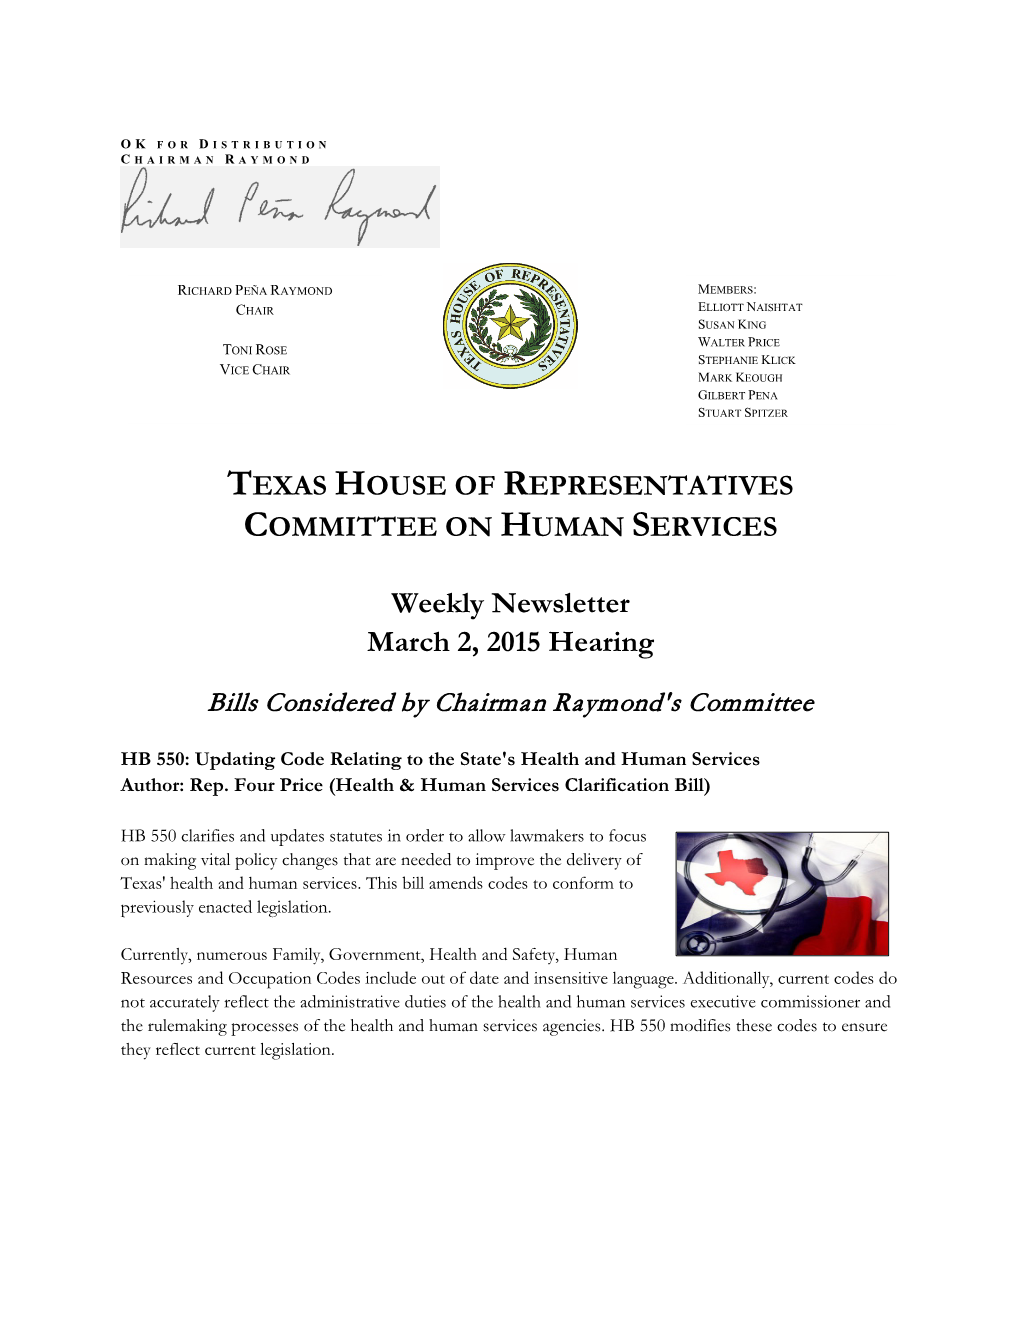 Weekly Newsletter March 2, 2015 Hearing